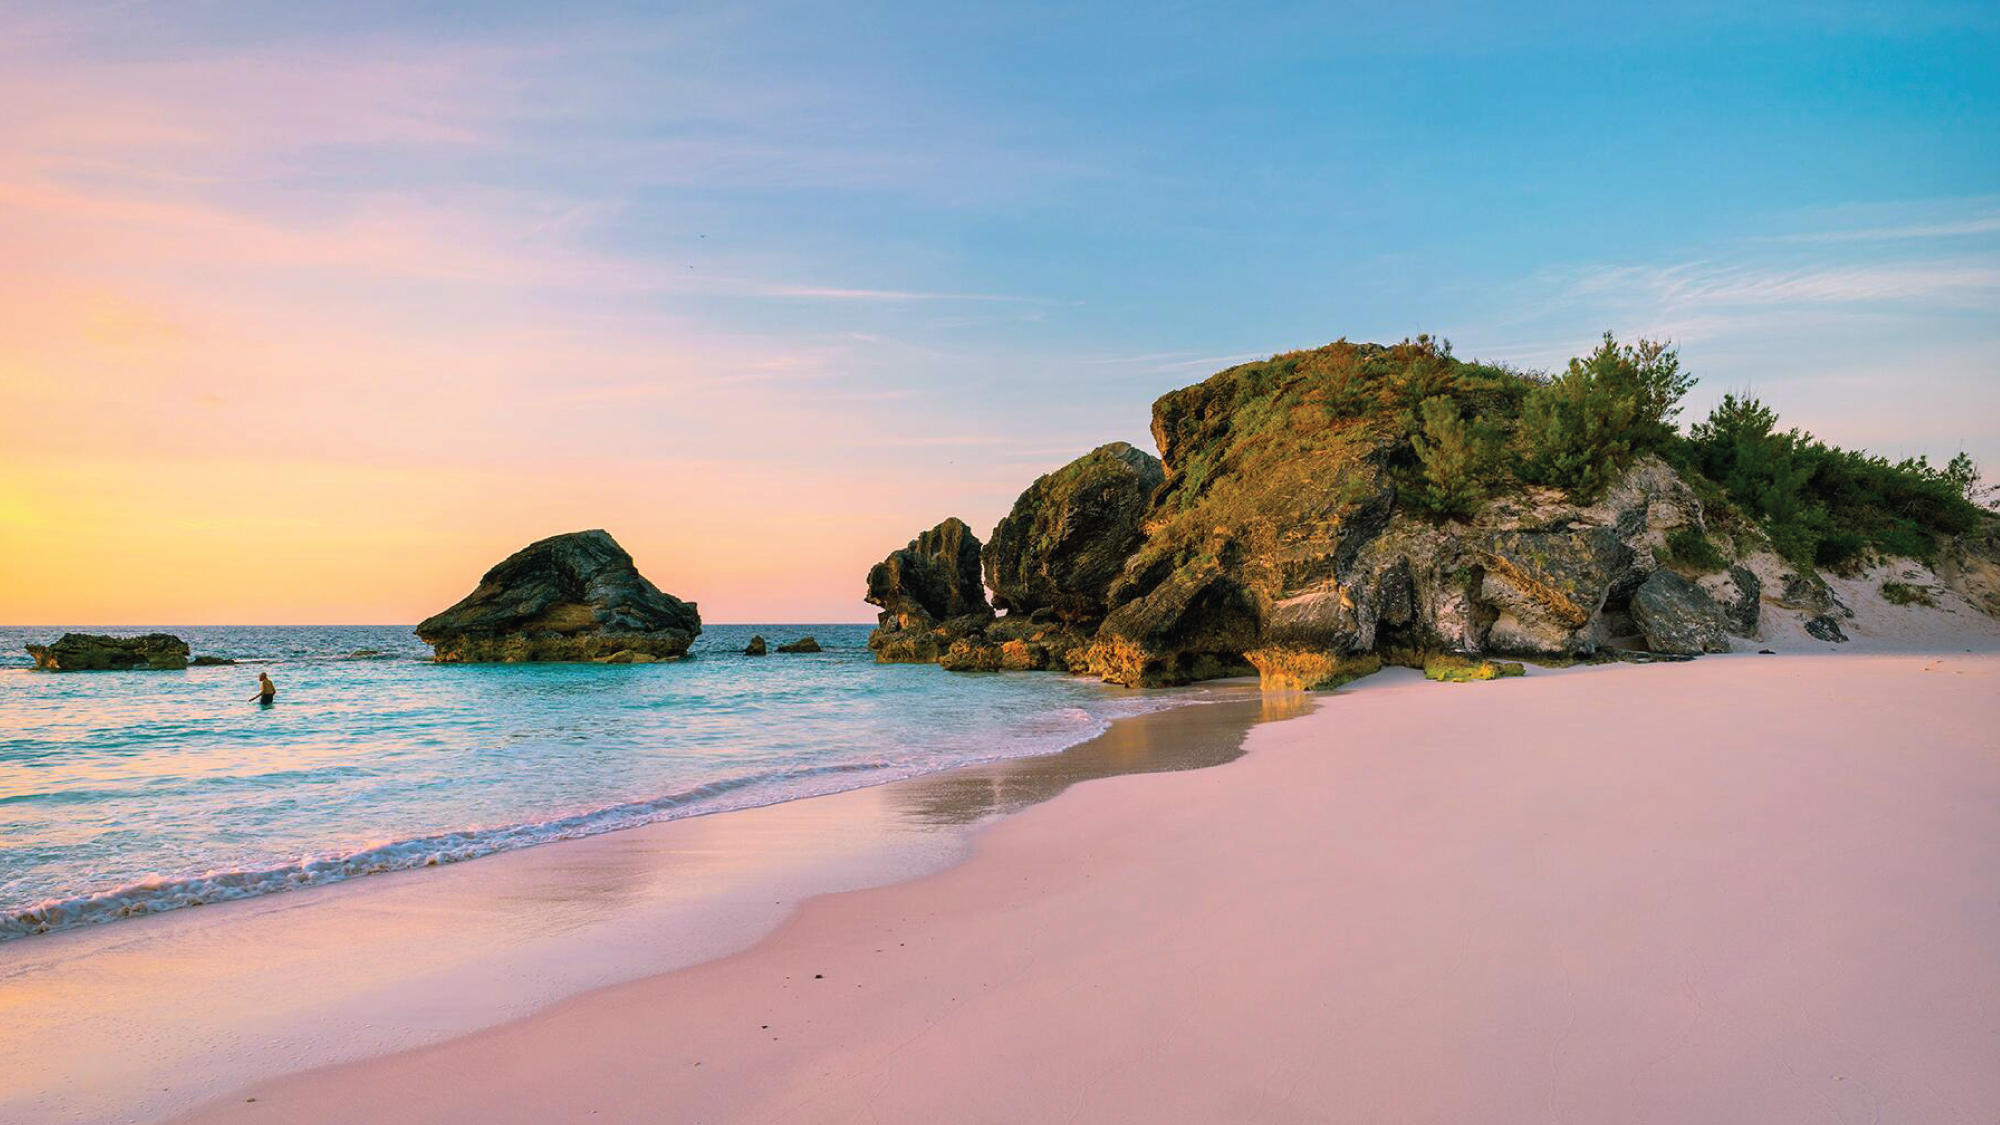 Crystal-clear waters and pink sand beaches.